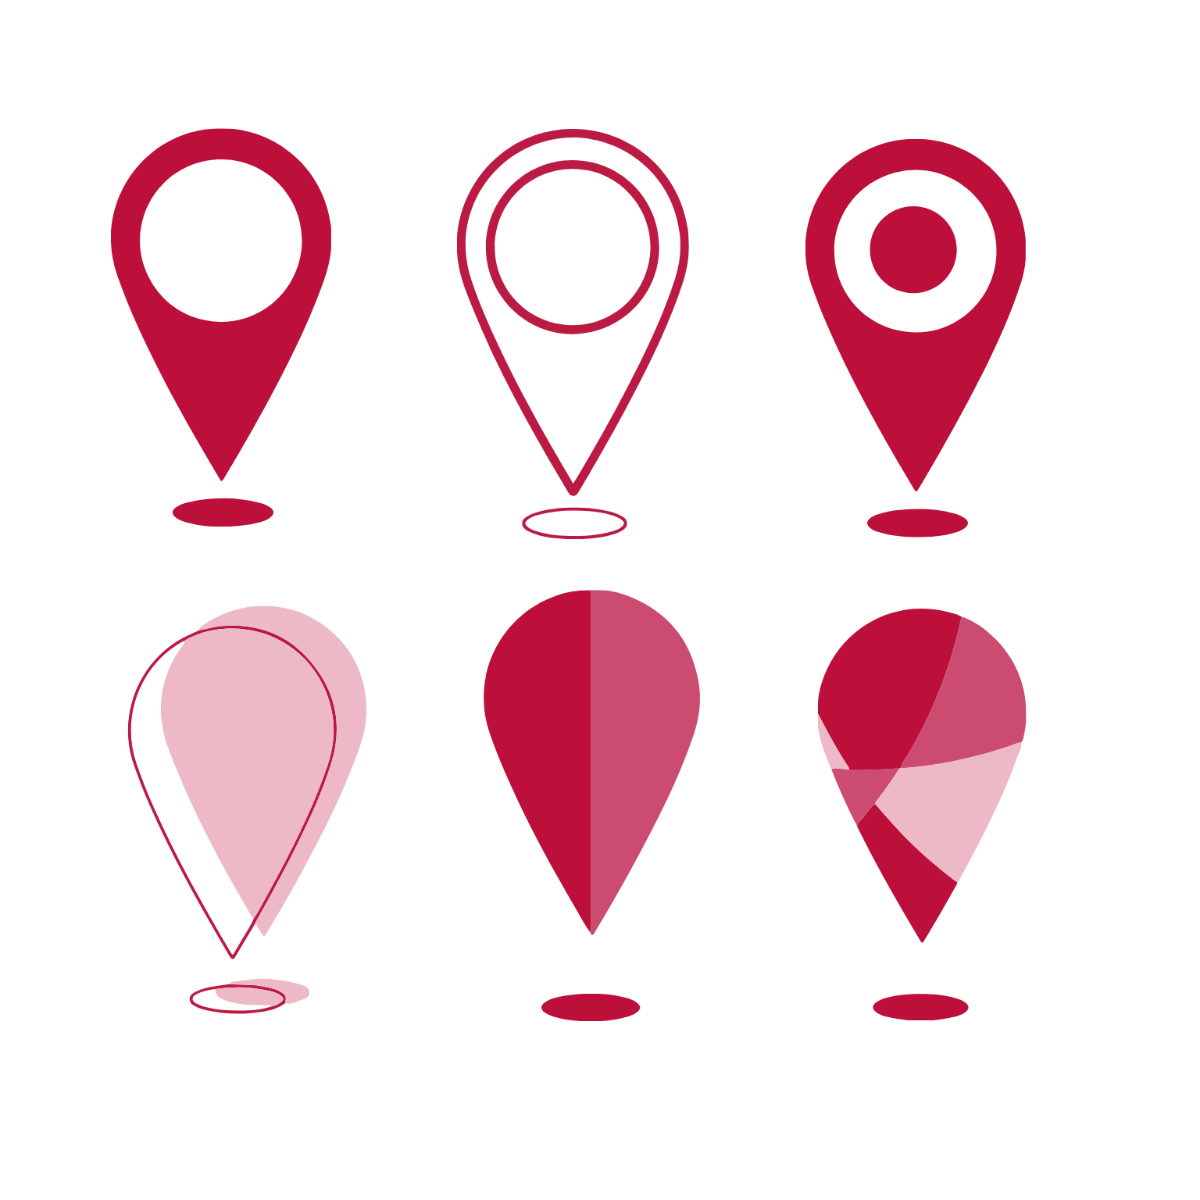 Location Point Vector Template